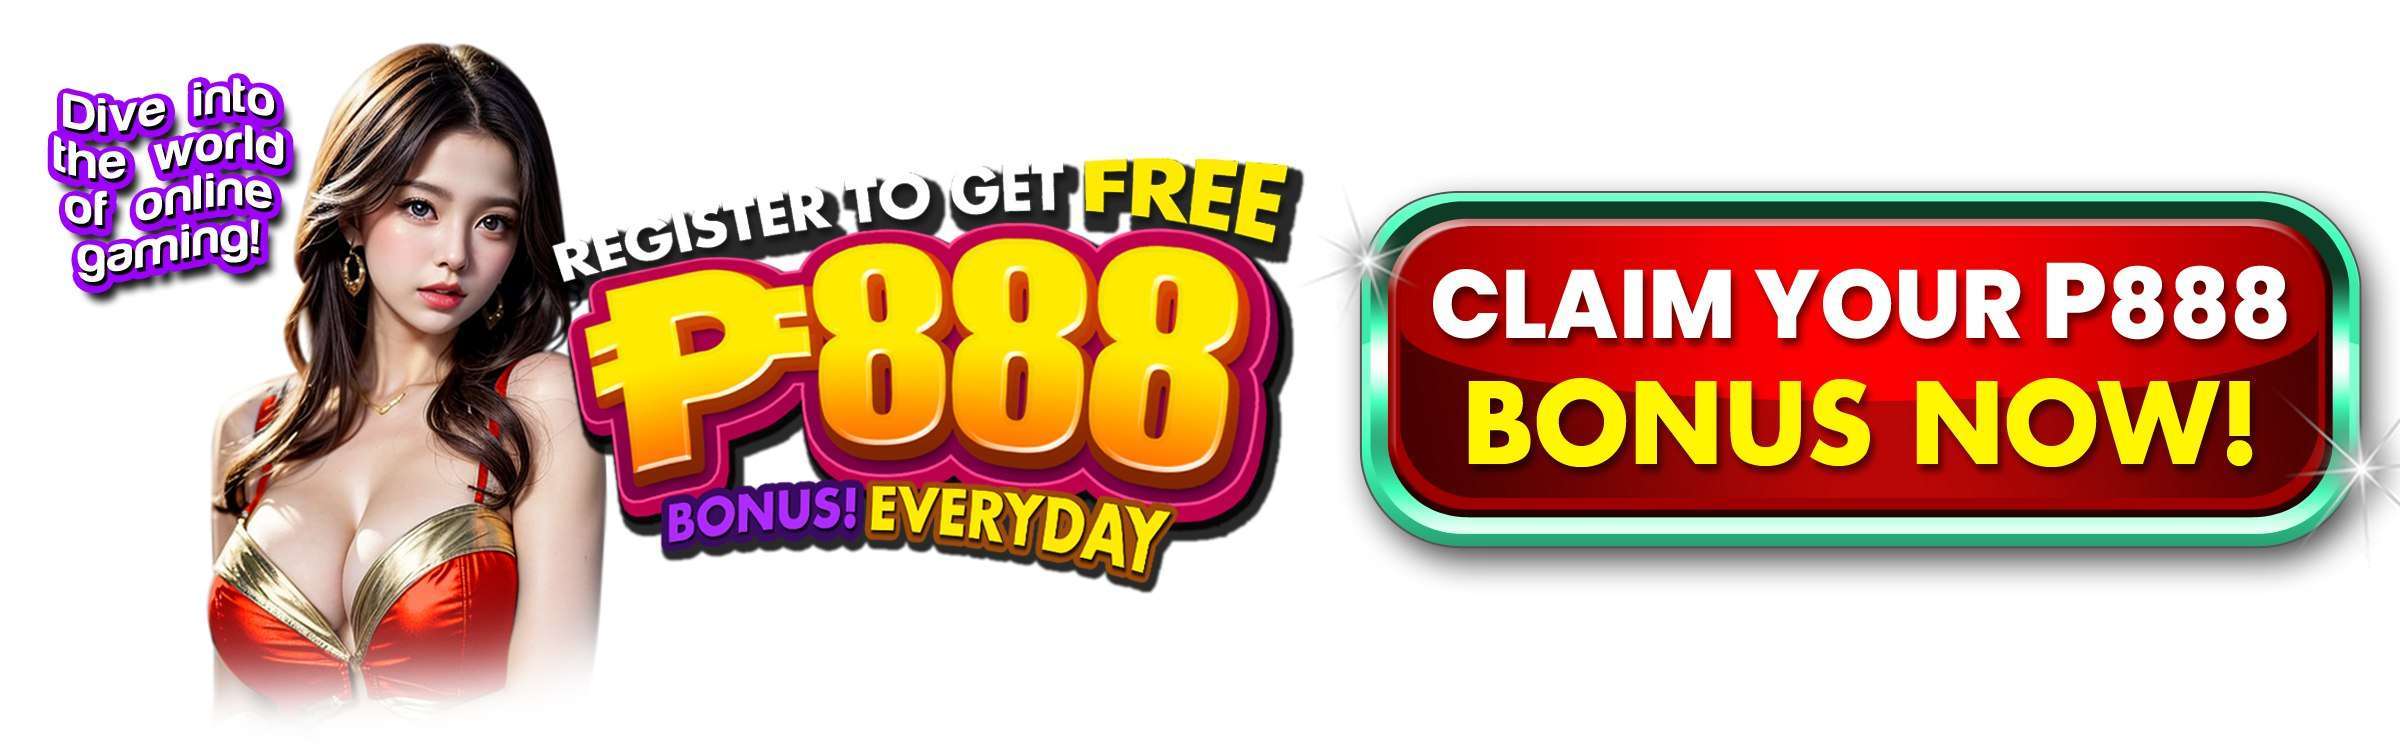 register to get free P888